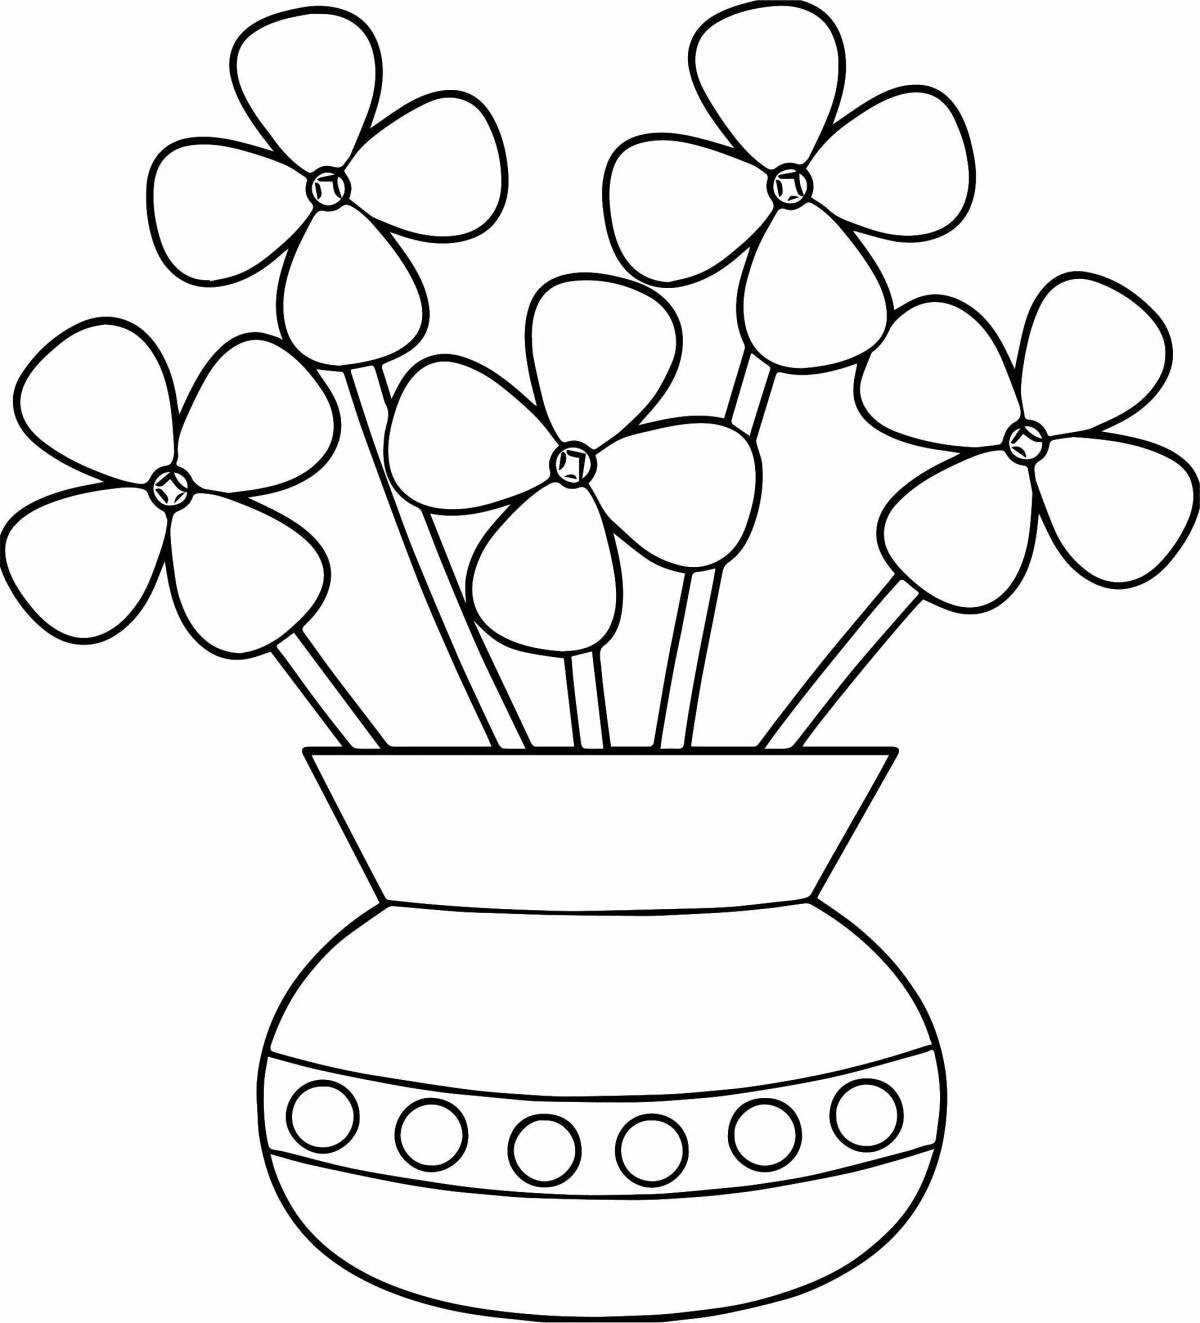 Fancy coloring flowers for kids